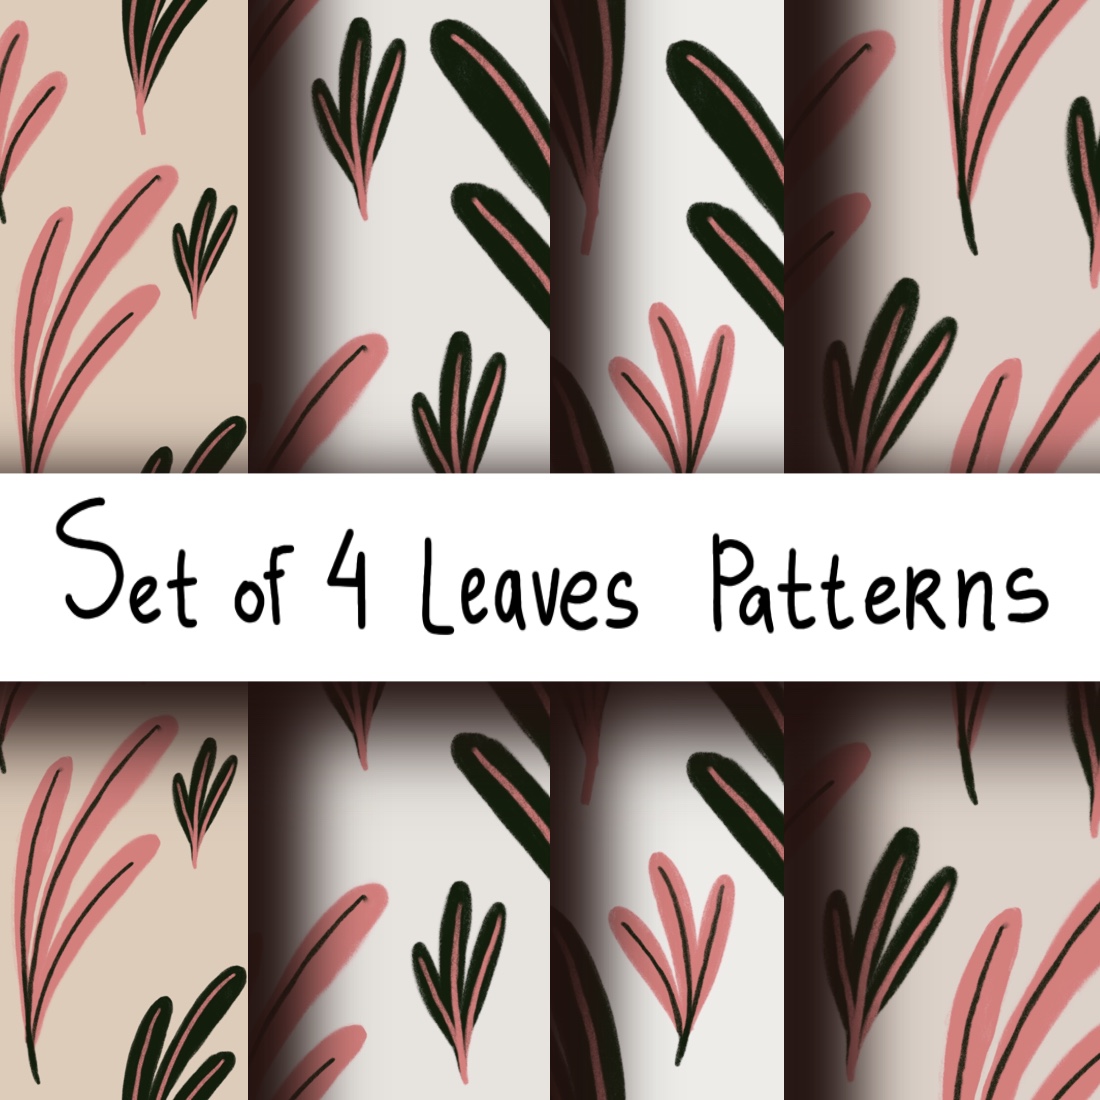 Set of Leaves Patterns cover image.